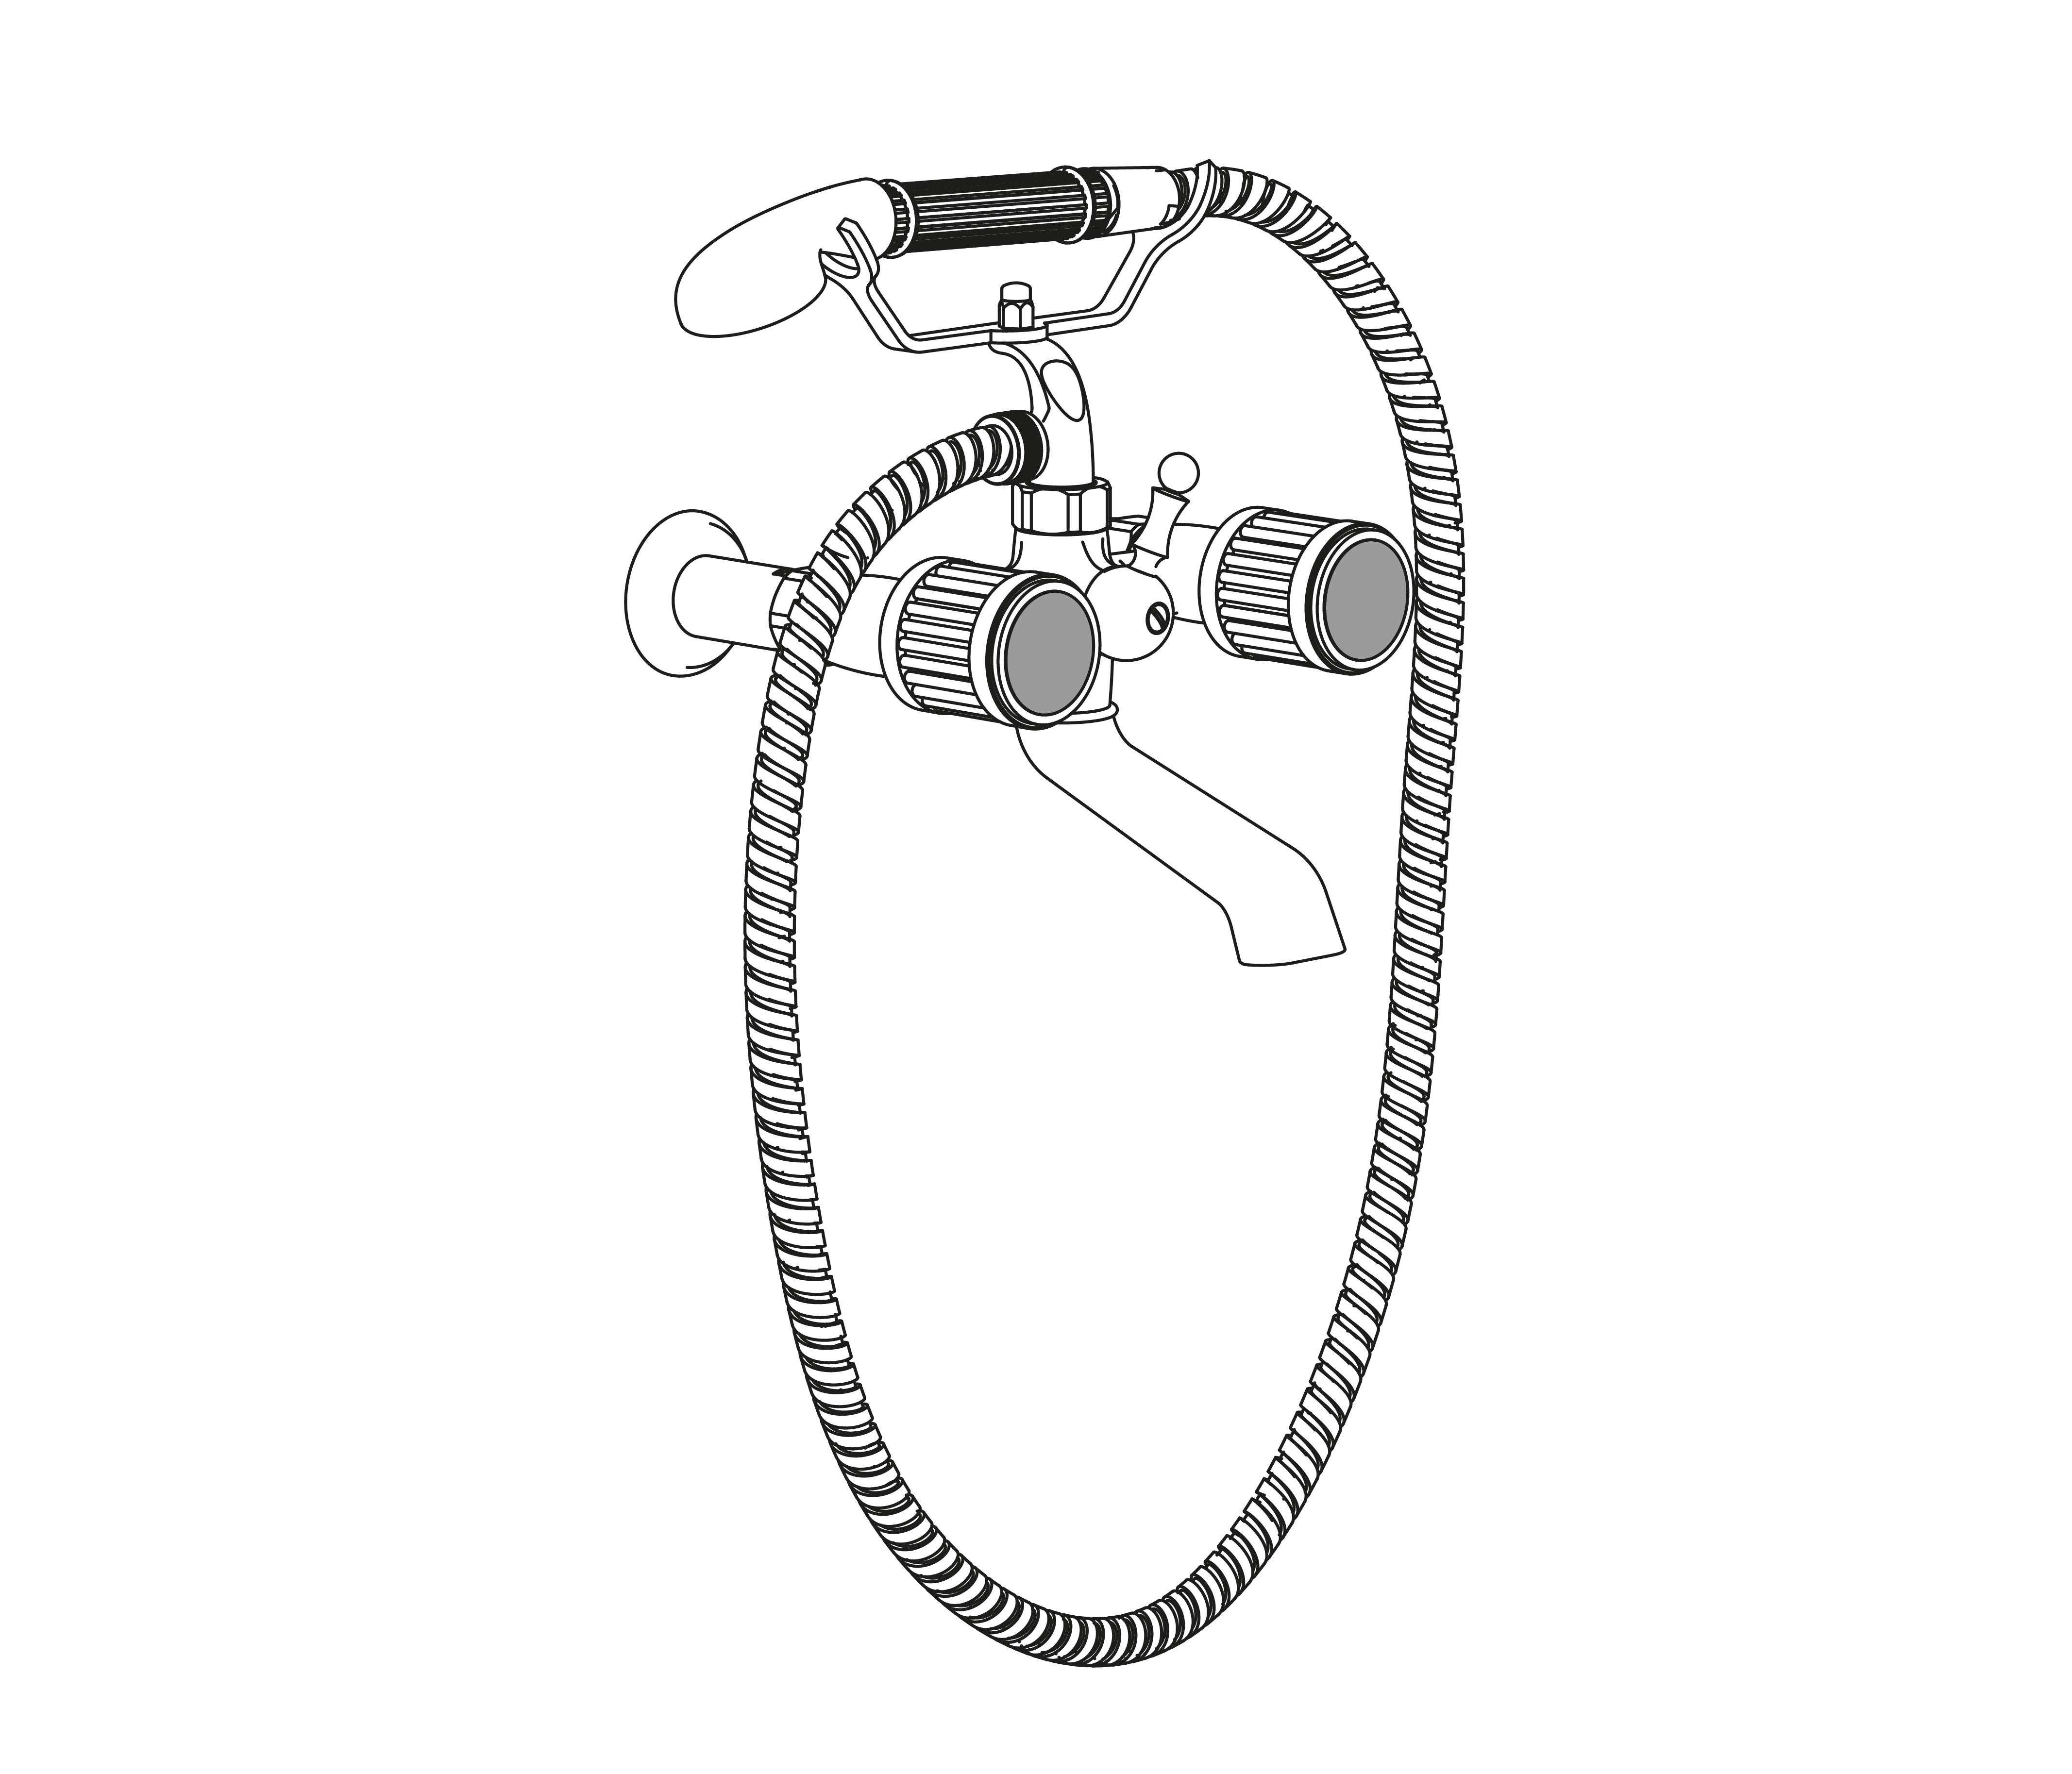 S92-3201 Wall mounted bath and shower mixer